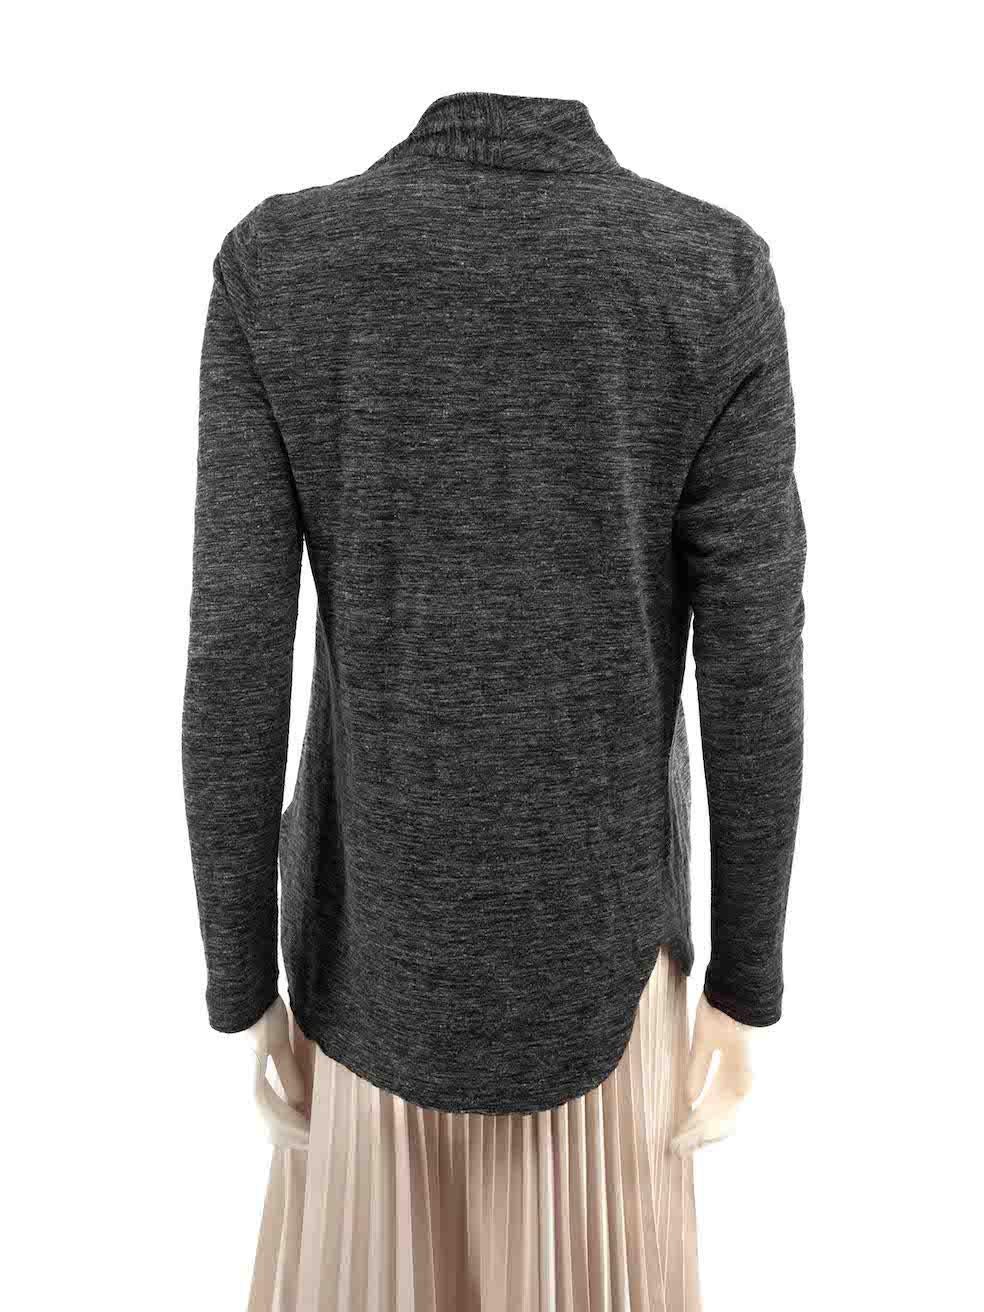 Isabel Marant Isabel Marant Etoile Grey Marl Turtleneck Top Size L In Good Condition For Sale In London, GB